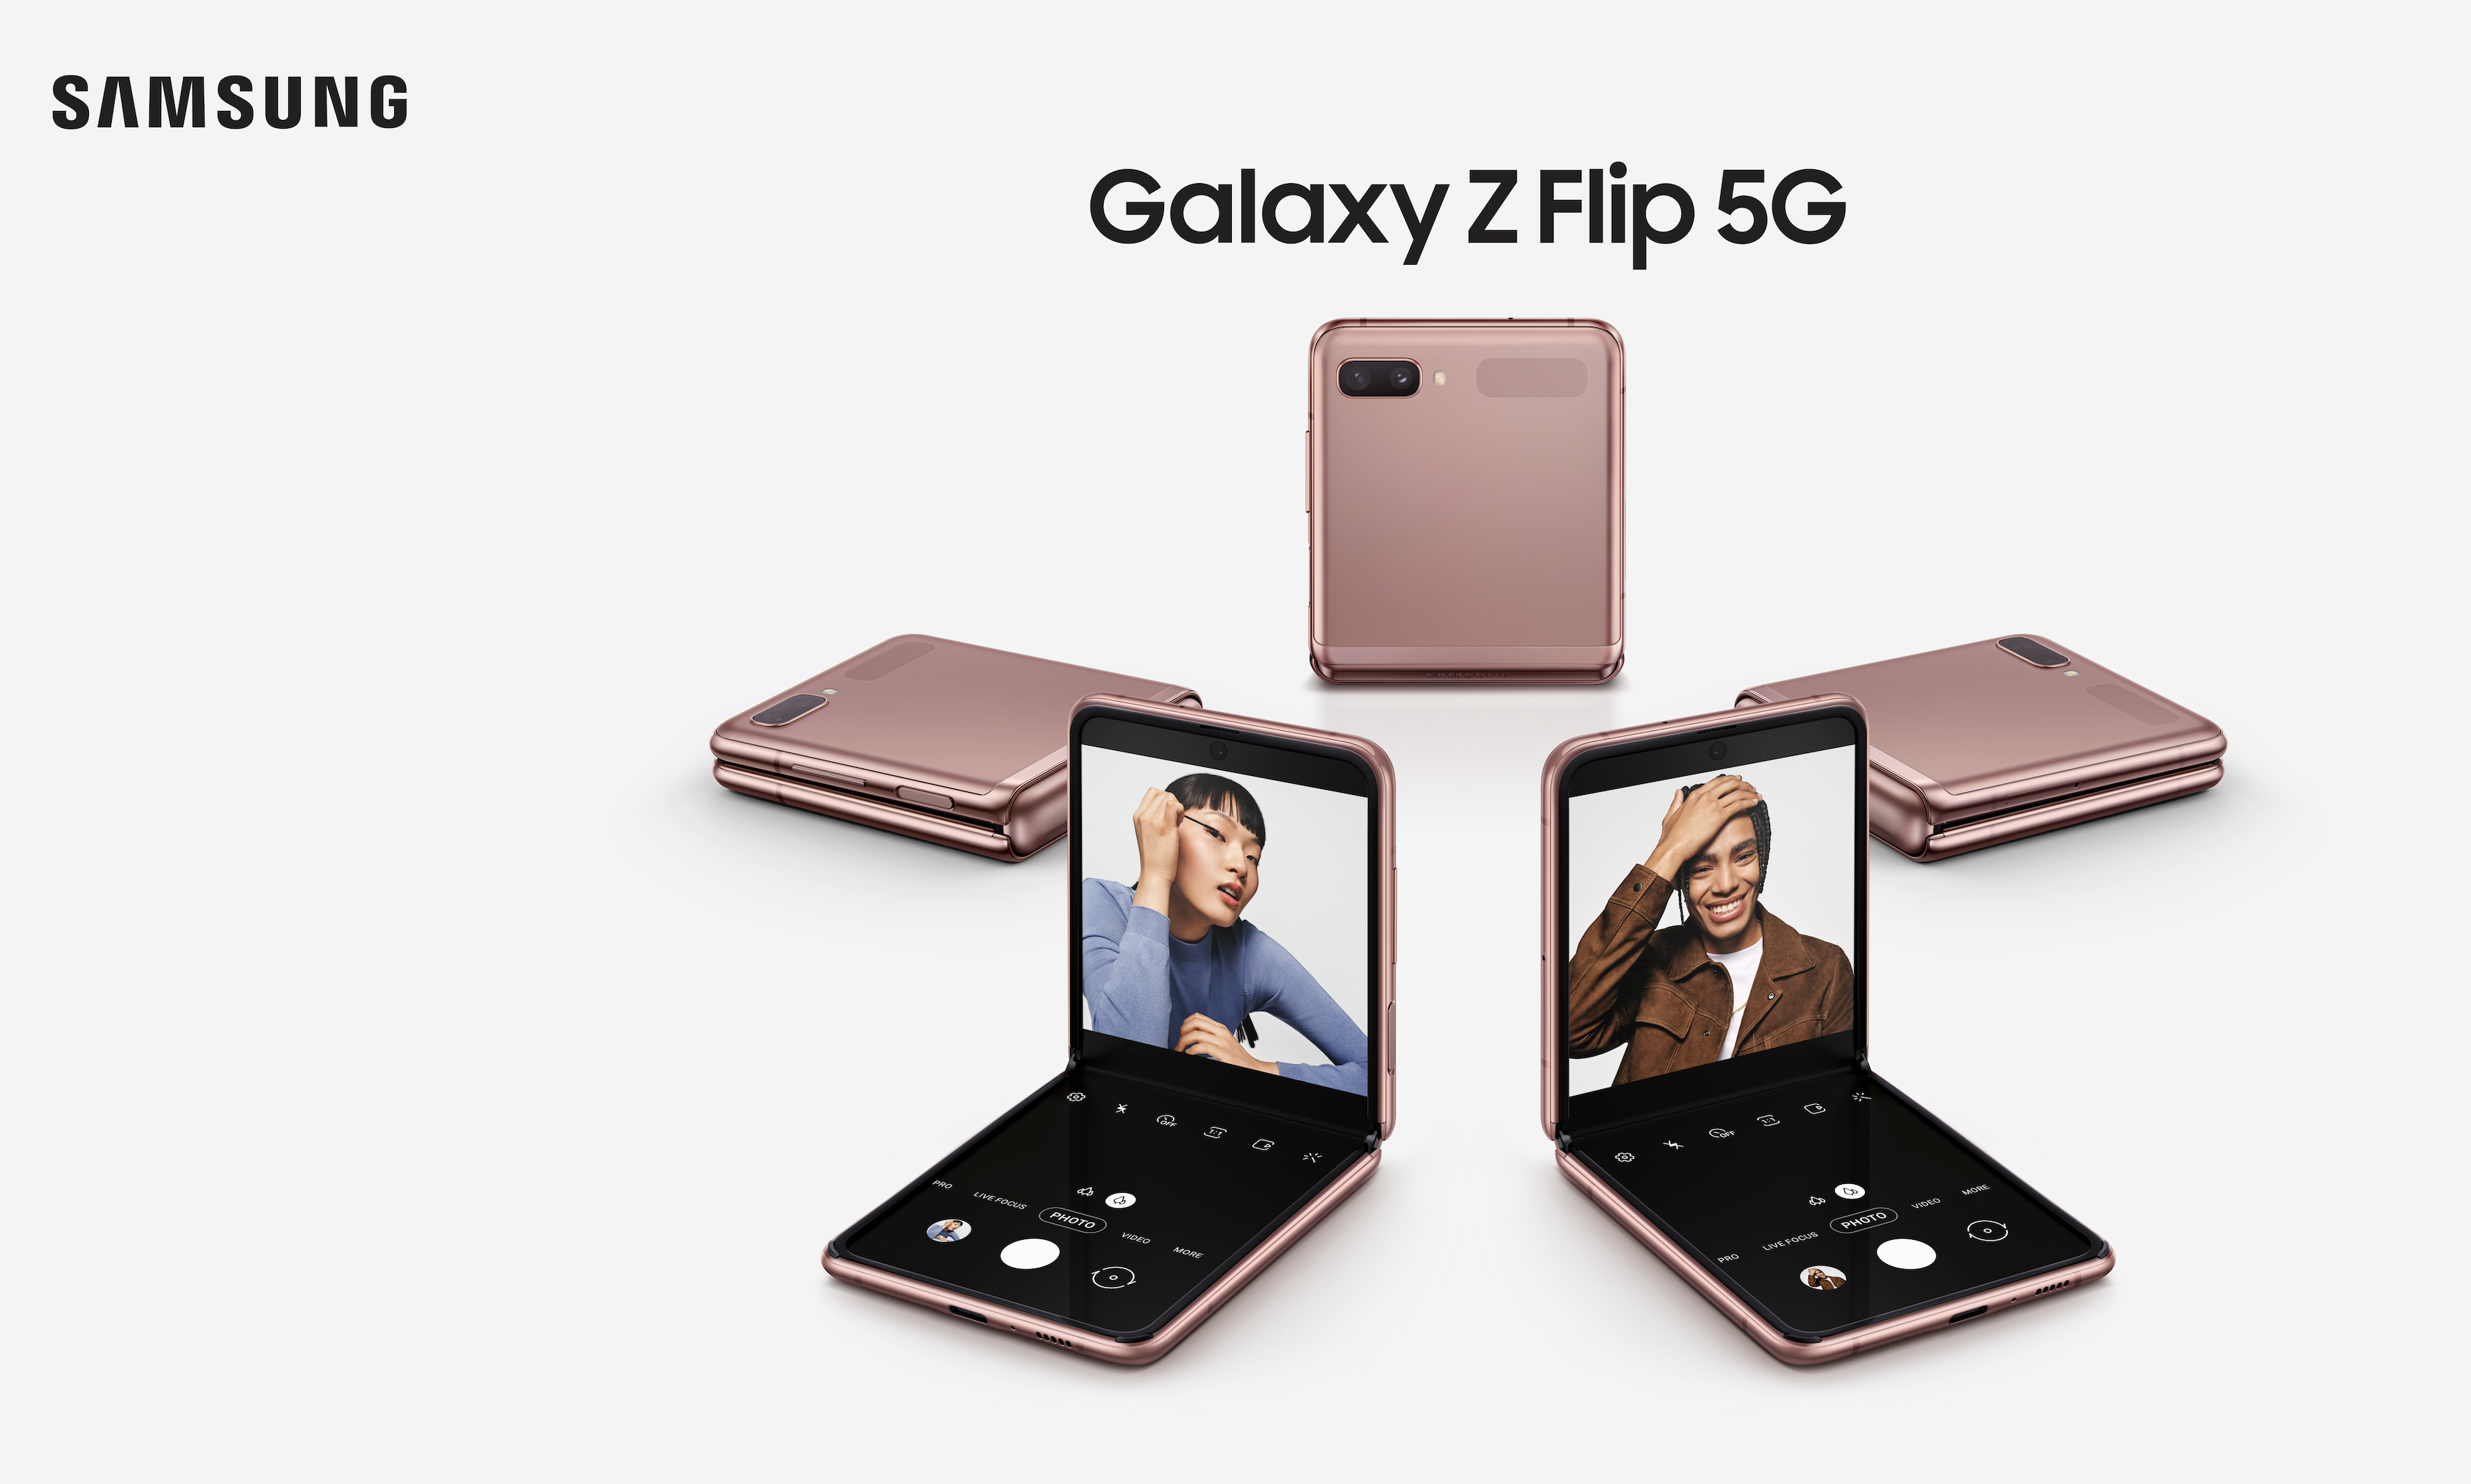 Samsung Galaxy Z Flip 5G goes official with Qualcomm Snapdragon 865+ mobile platform and $69 price hike